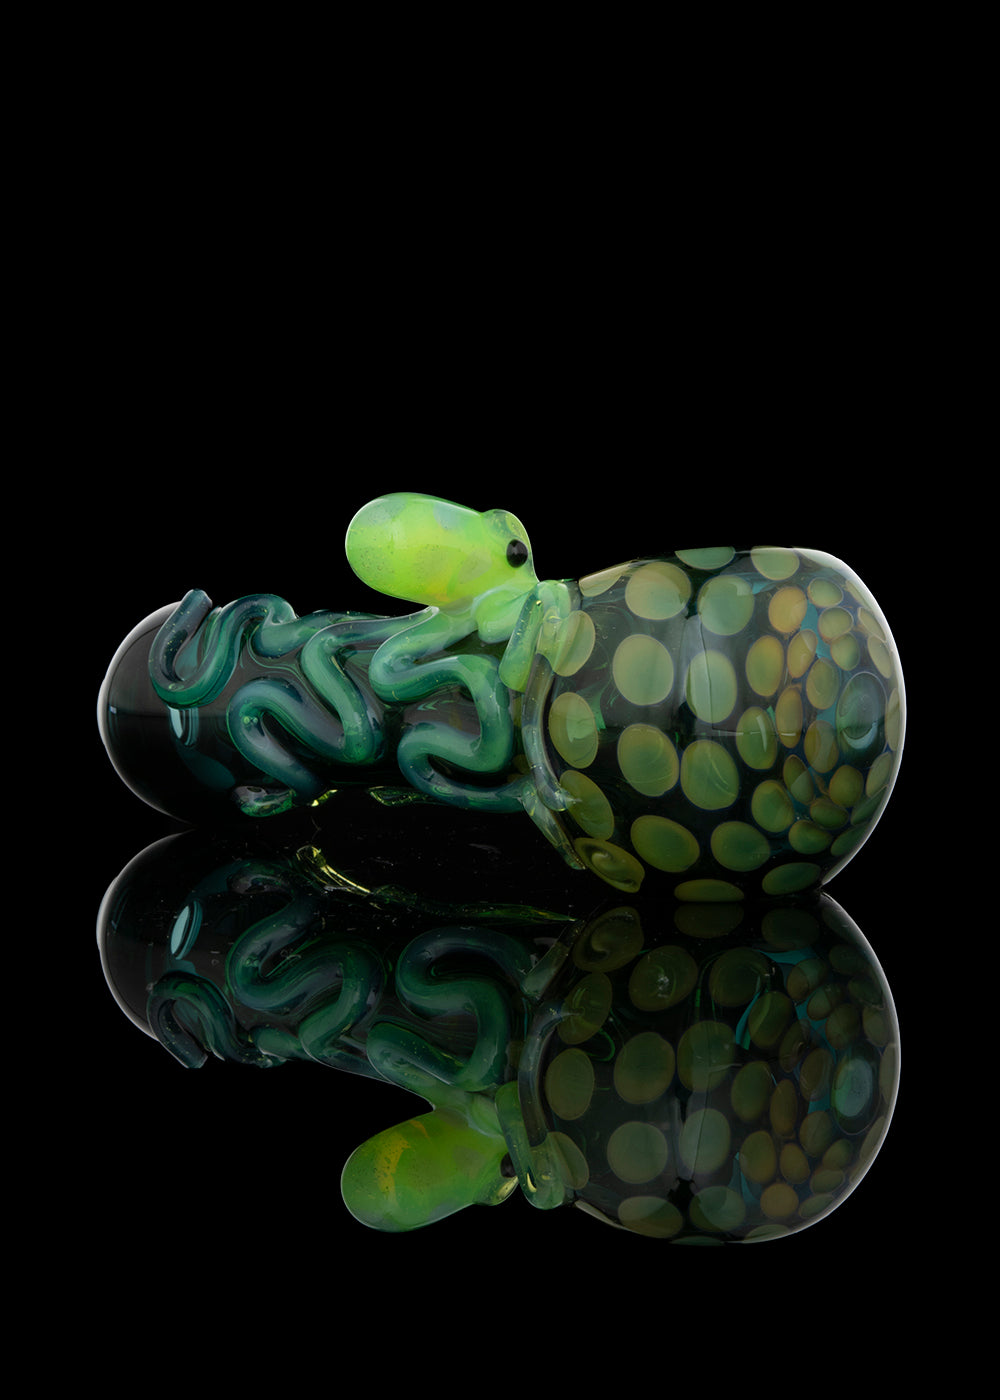 Teal Spoon with Green Slyme Octopus by Curtis Claw